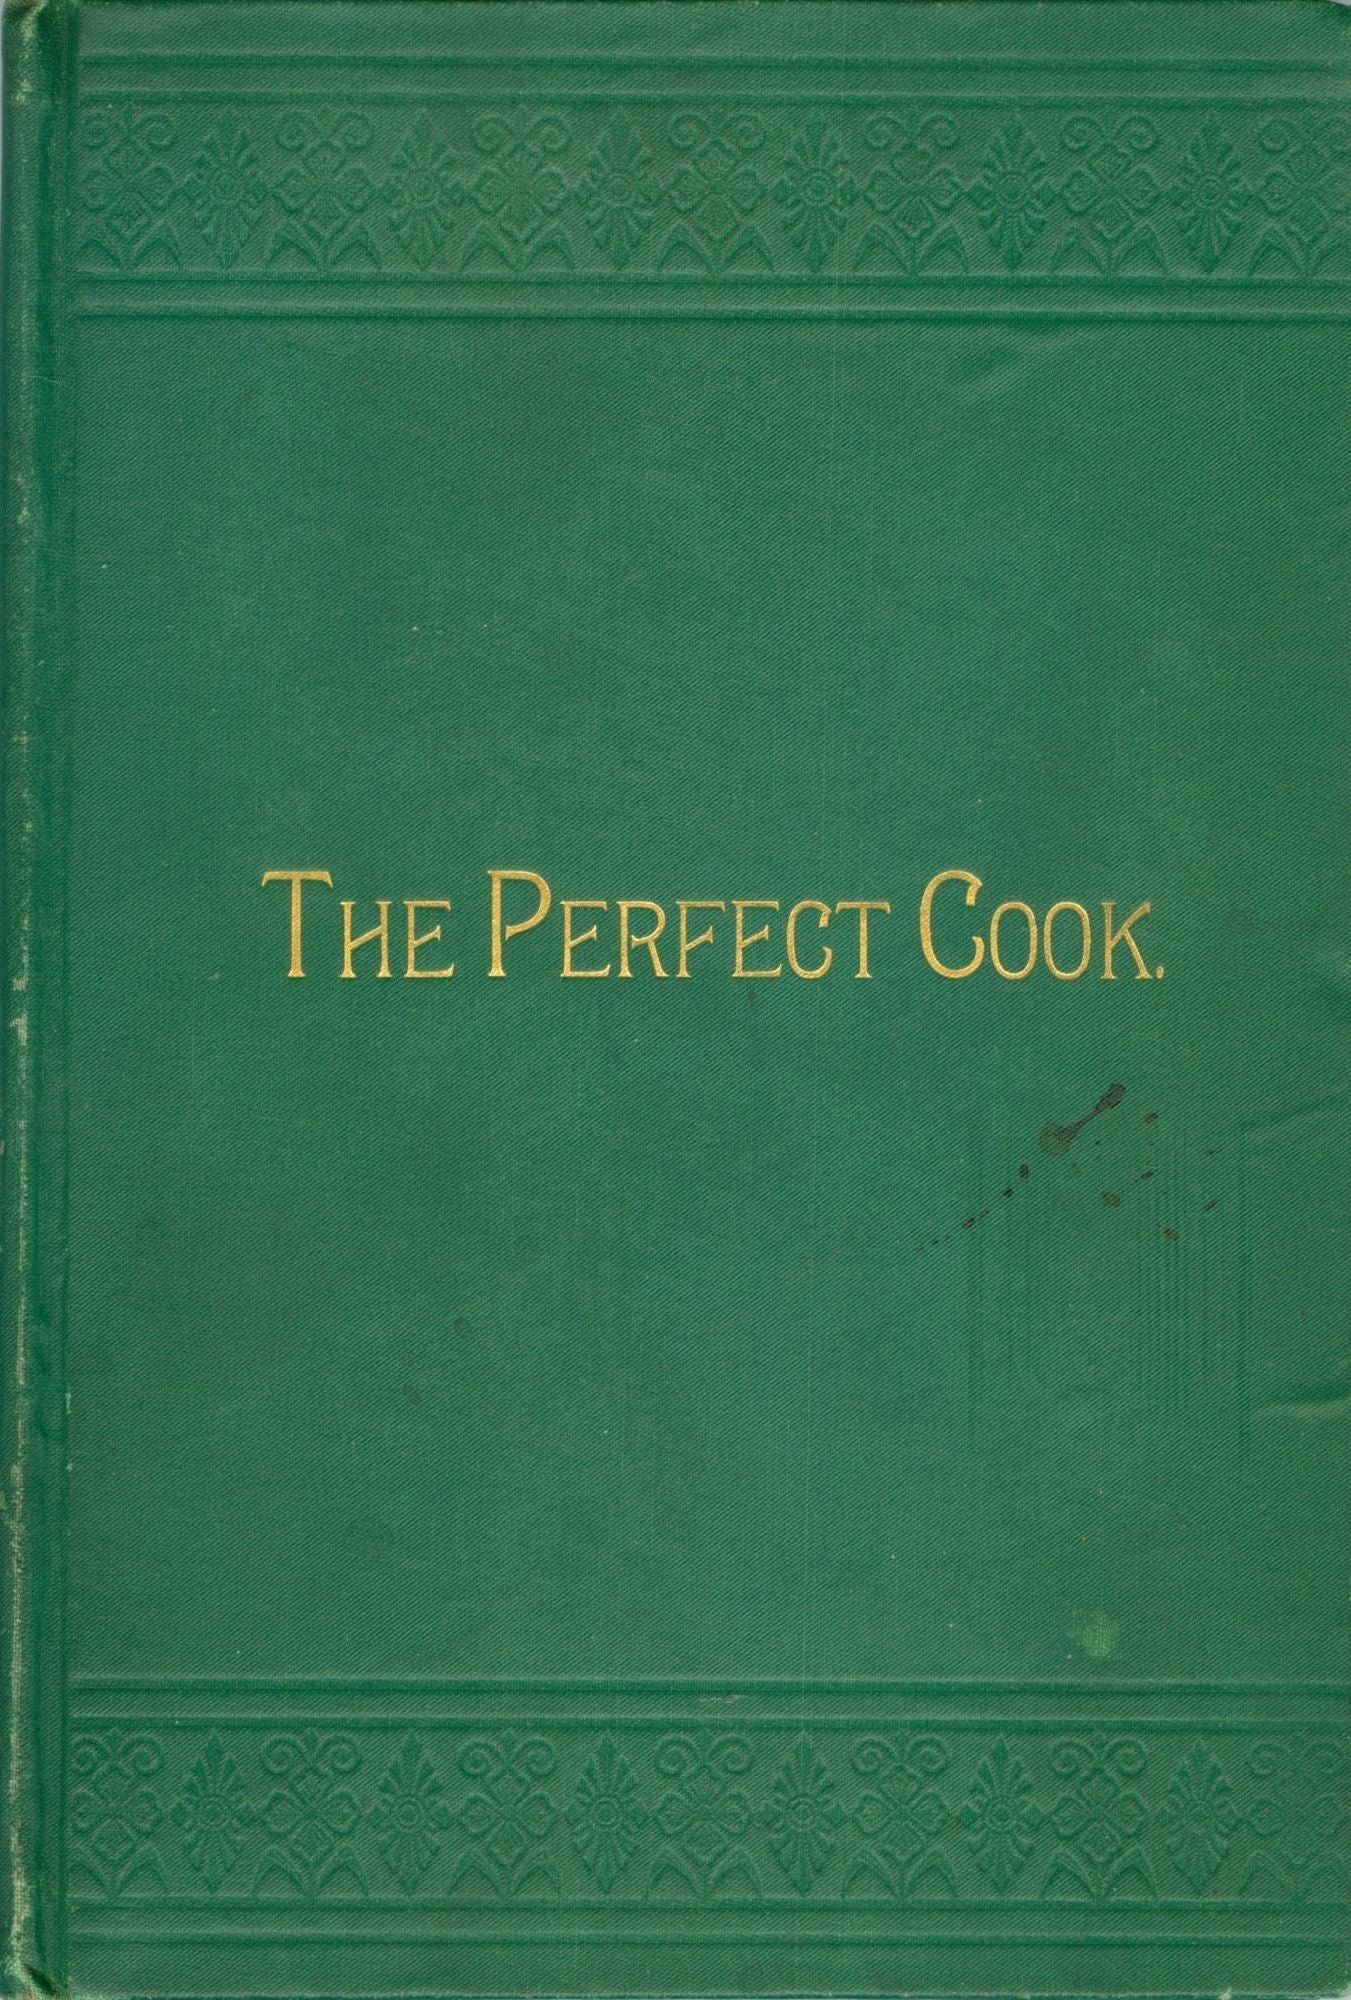 Item #4266 The Improved Edition of The Perfect Cook: A Receipt Book, Containing Many Choice and Carefully Tested Receipts of Practical Value to Every Housekeeper. Compiled and Sold by the Ladies of St. Paul's Episcopal Church, Evansville, Ind. Evansville Indiana, Ladies of St. Paul's Episcopal Church.